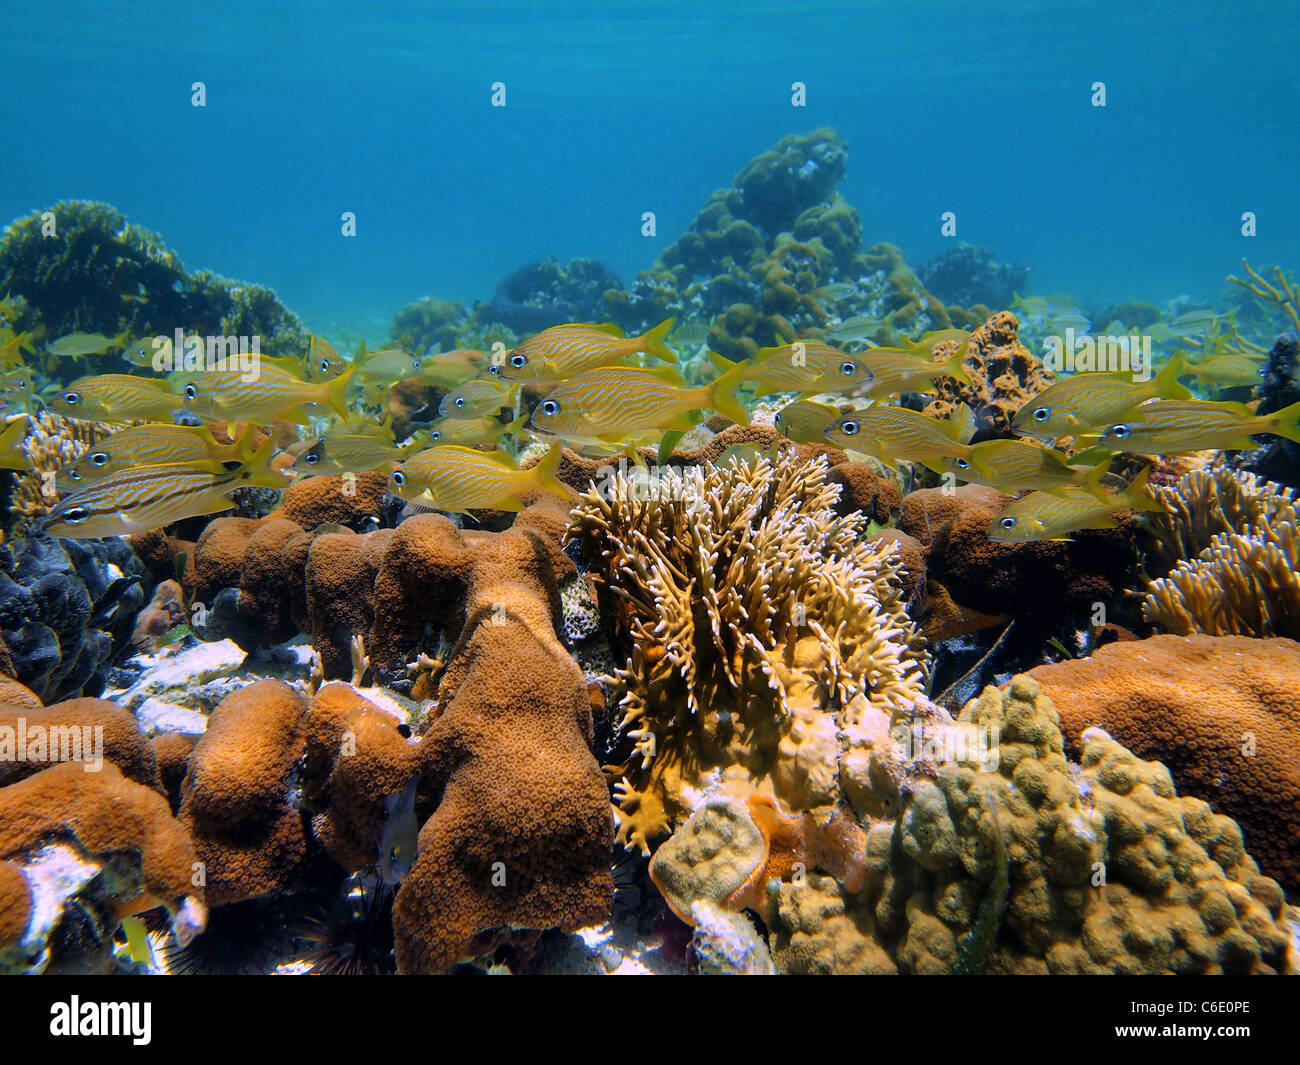 Coral and french grunt fish in the caribbean sea Stock Photo